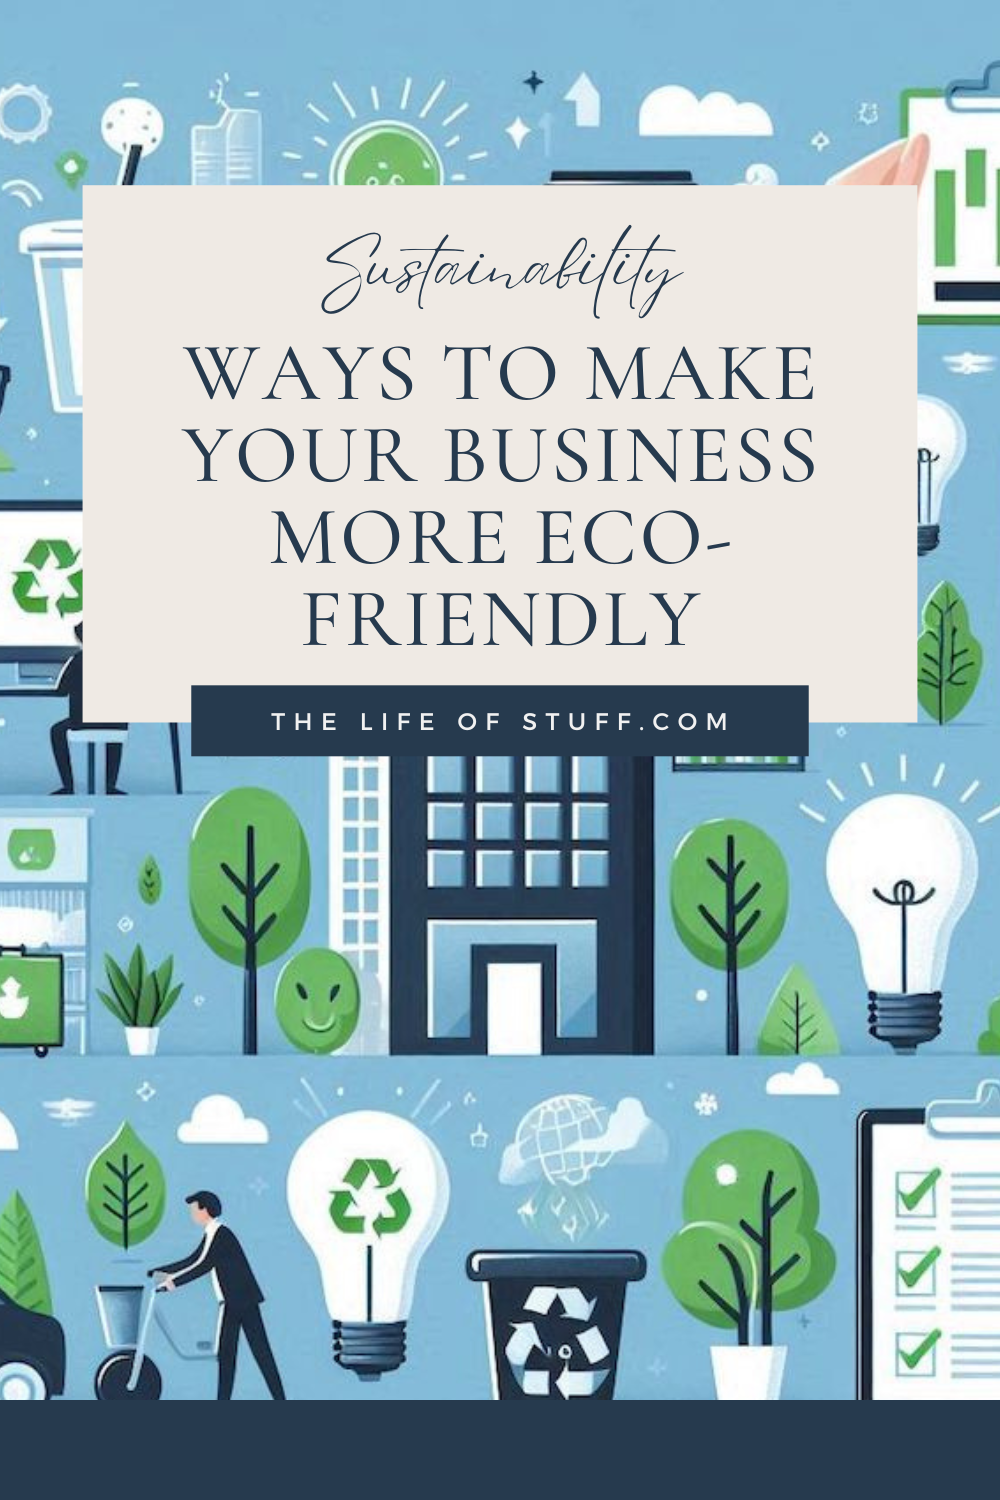 Ways To Make Your Business More Eco-Friendly - The Life of Stuff